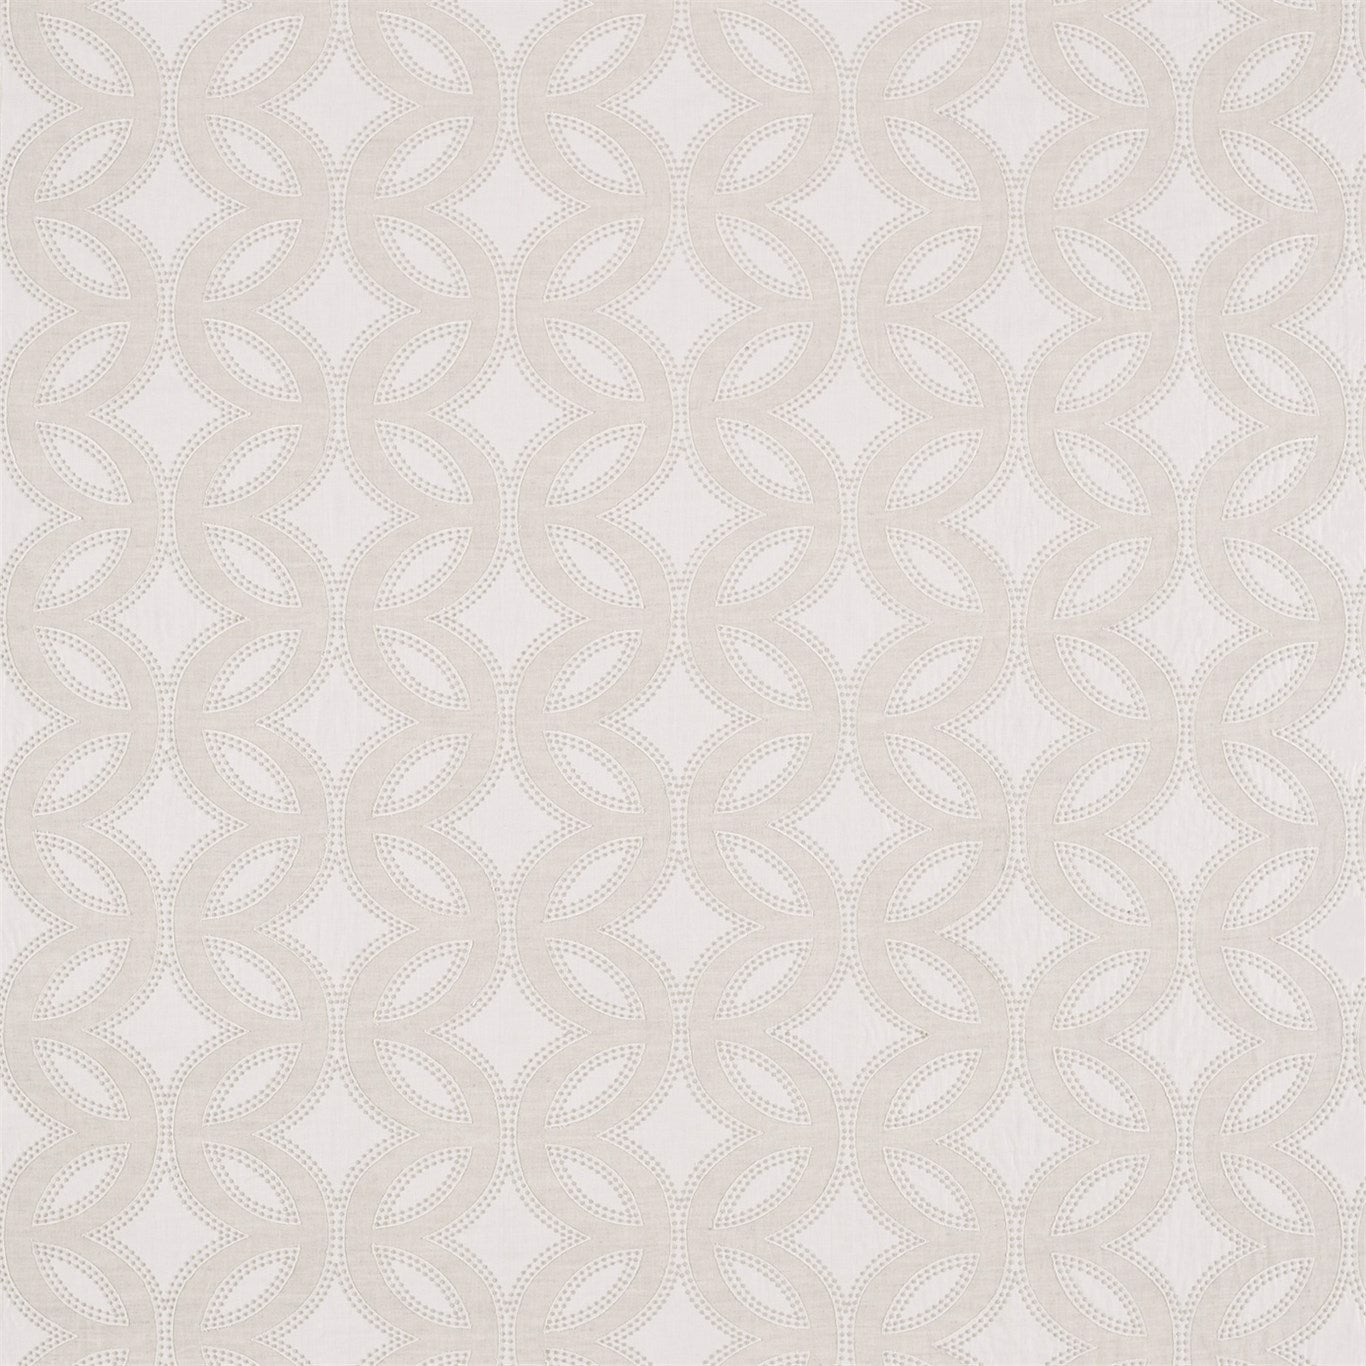 Caprice Fabric by Harlequin - HPOF130900 - Chalk/Linen